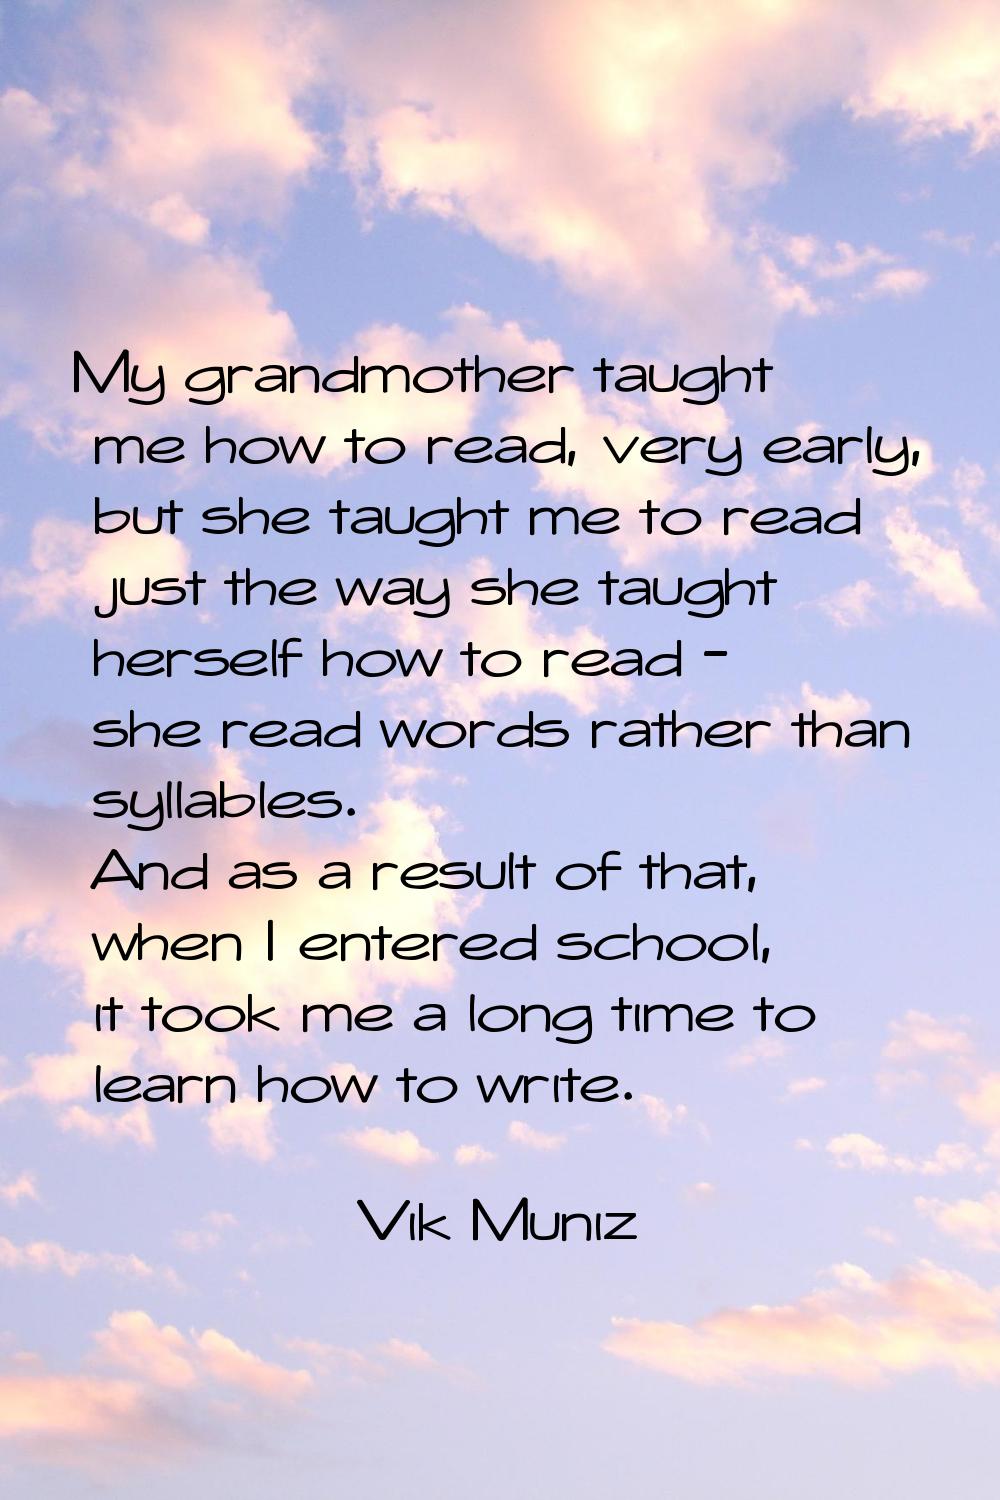 My grandmother taught me how to read, very early, but she taught me to read just the way she taught